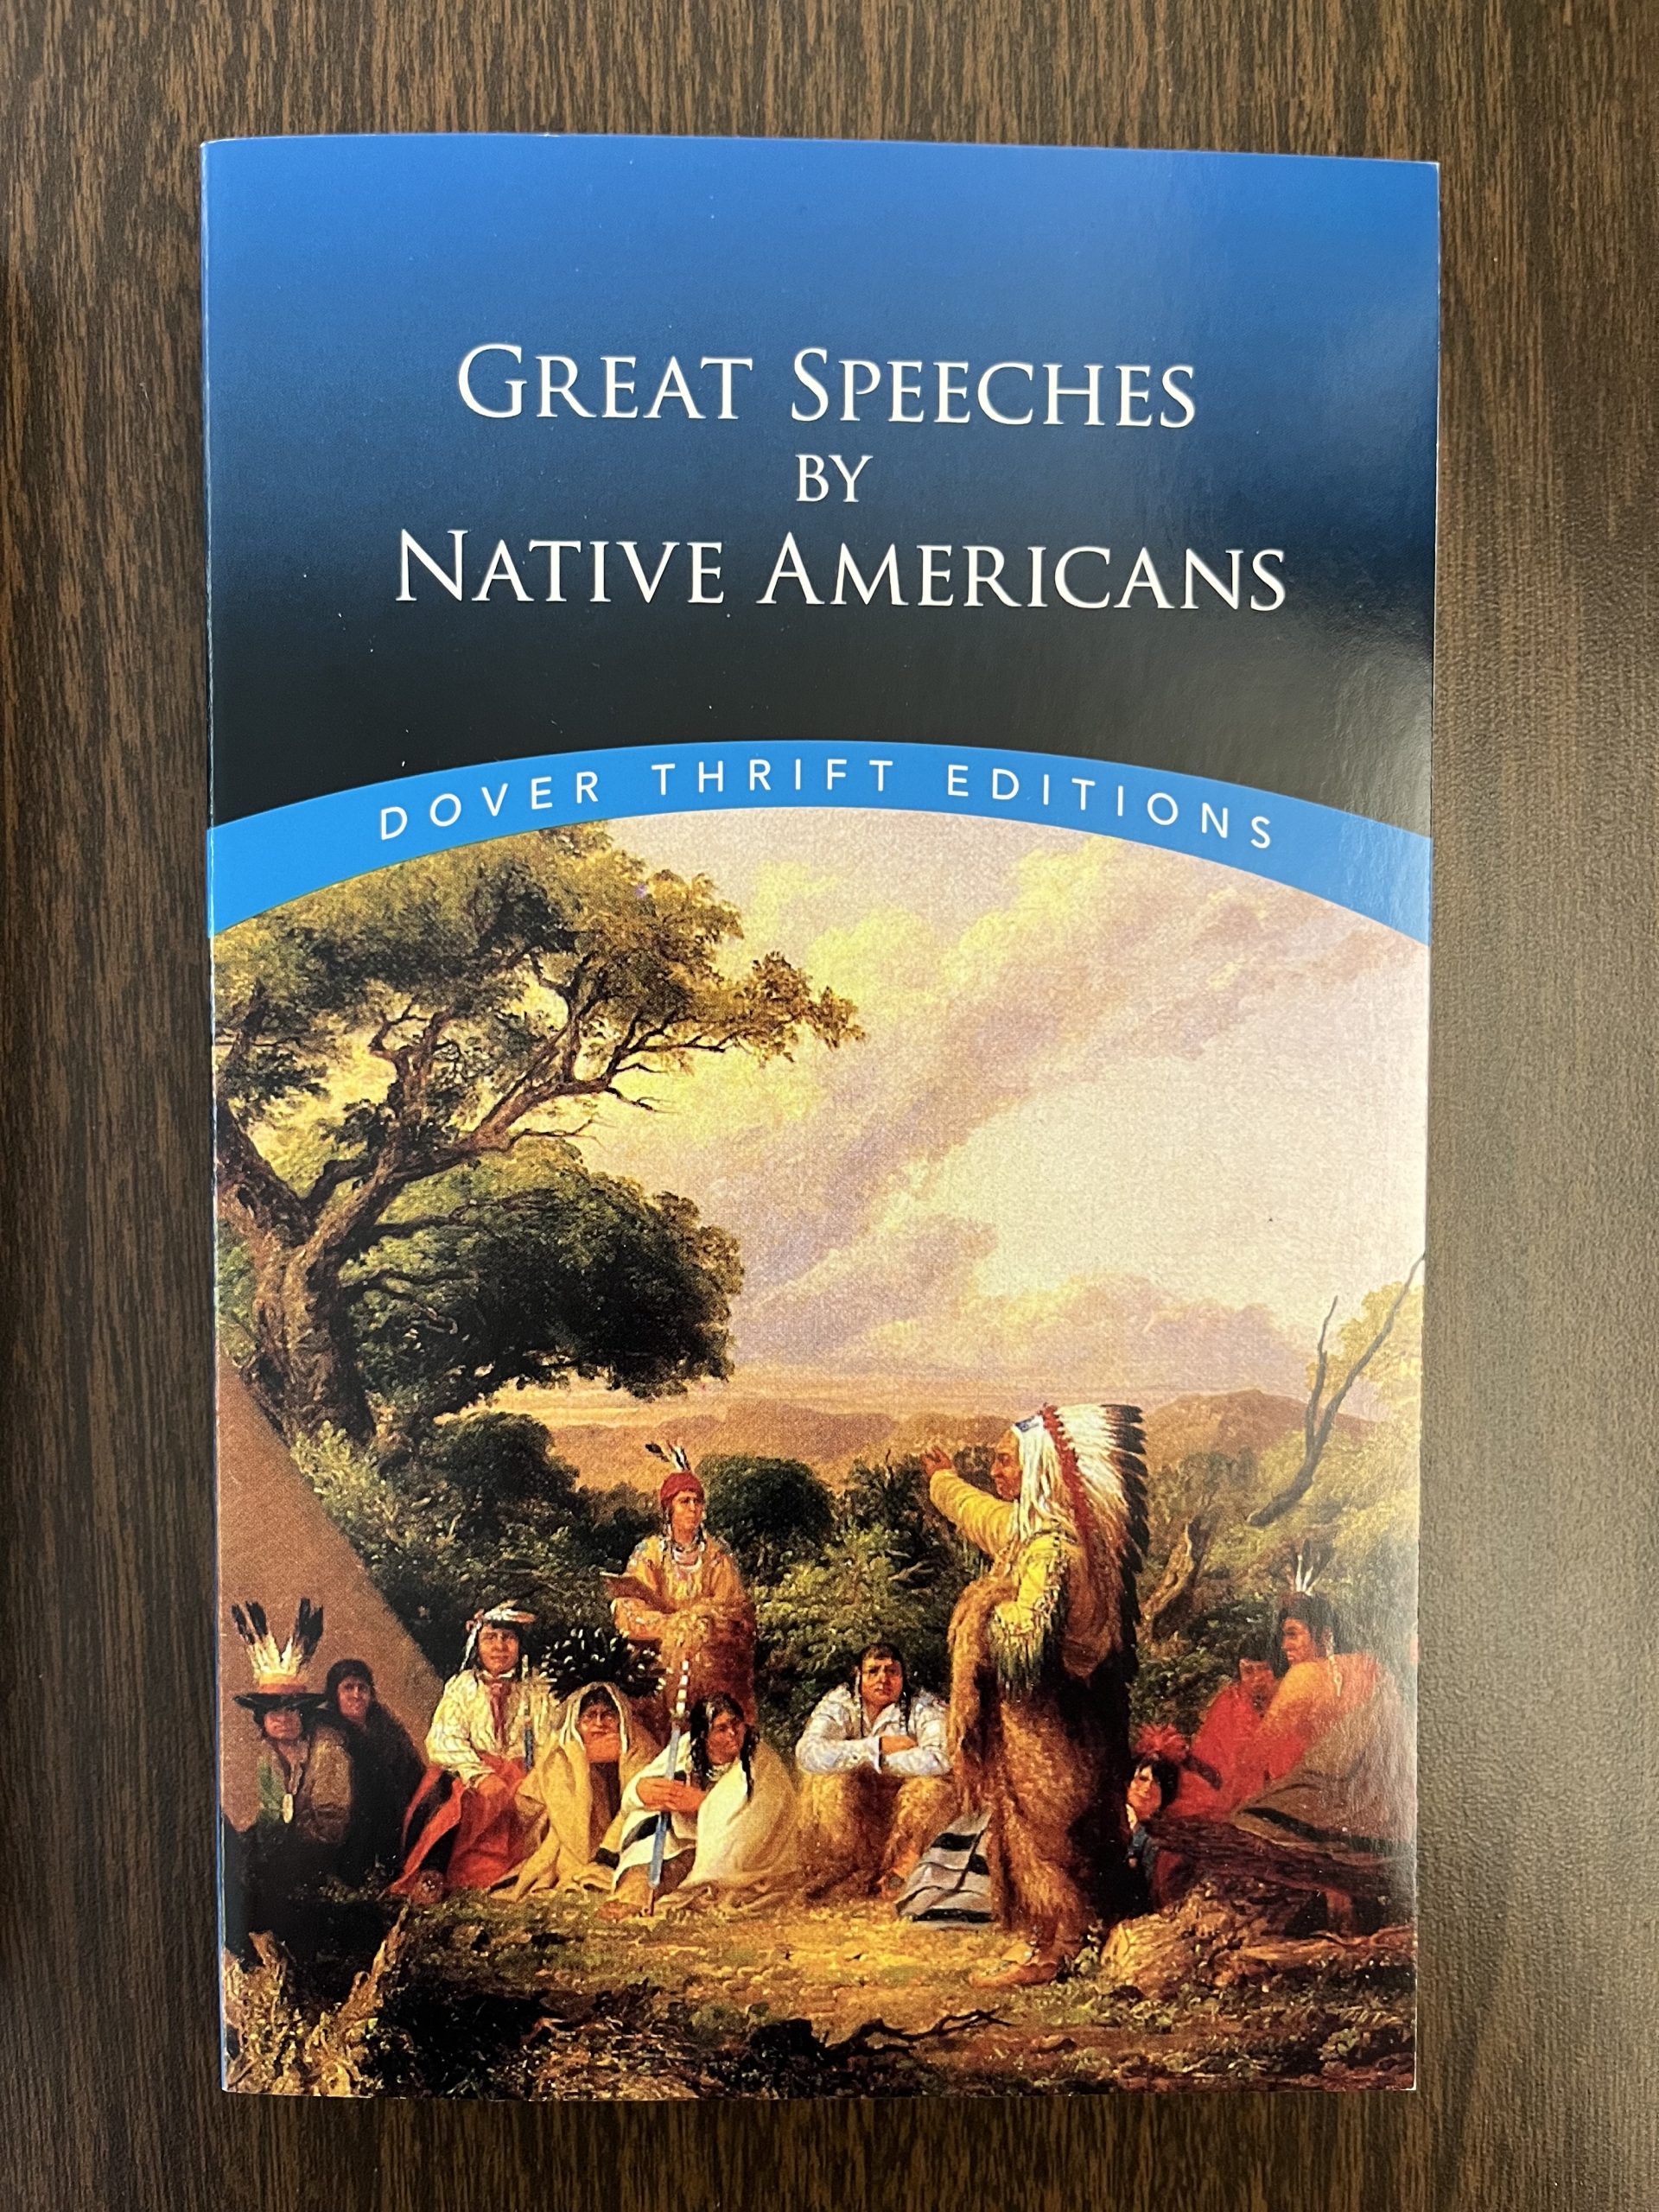 Great Speeches by Native Americans